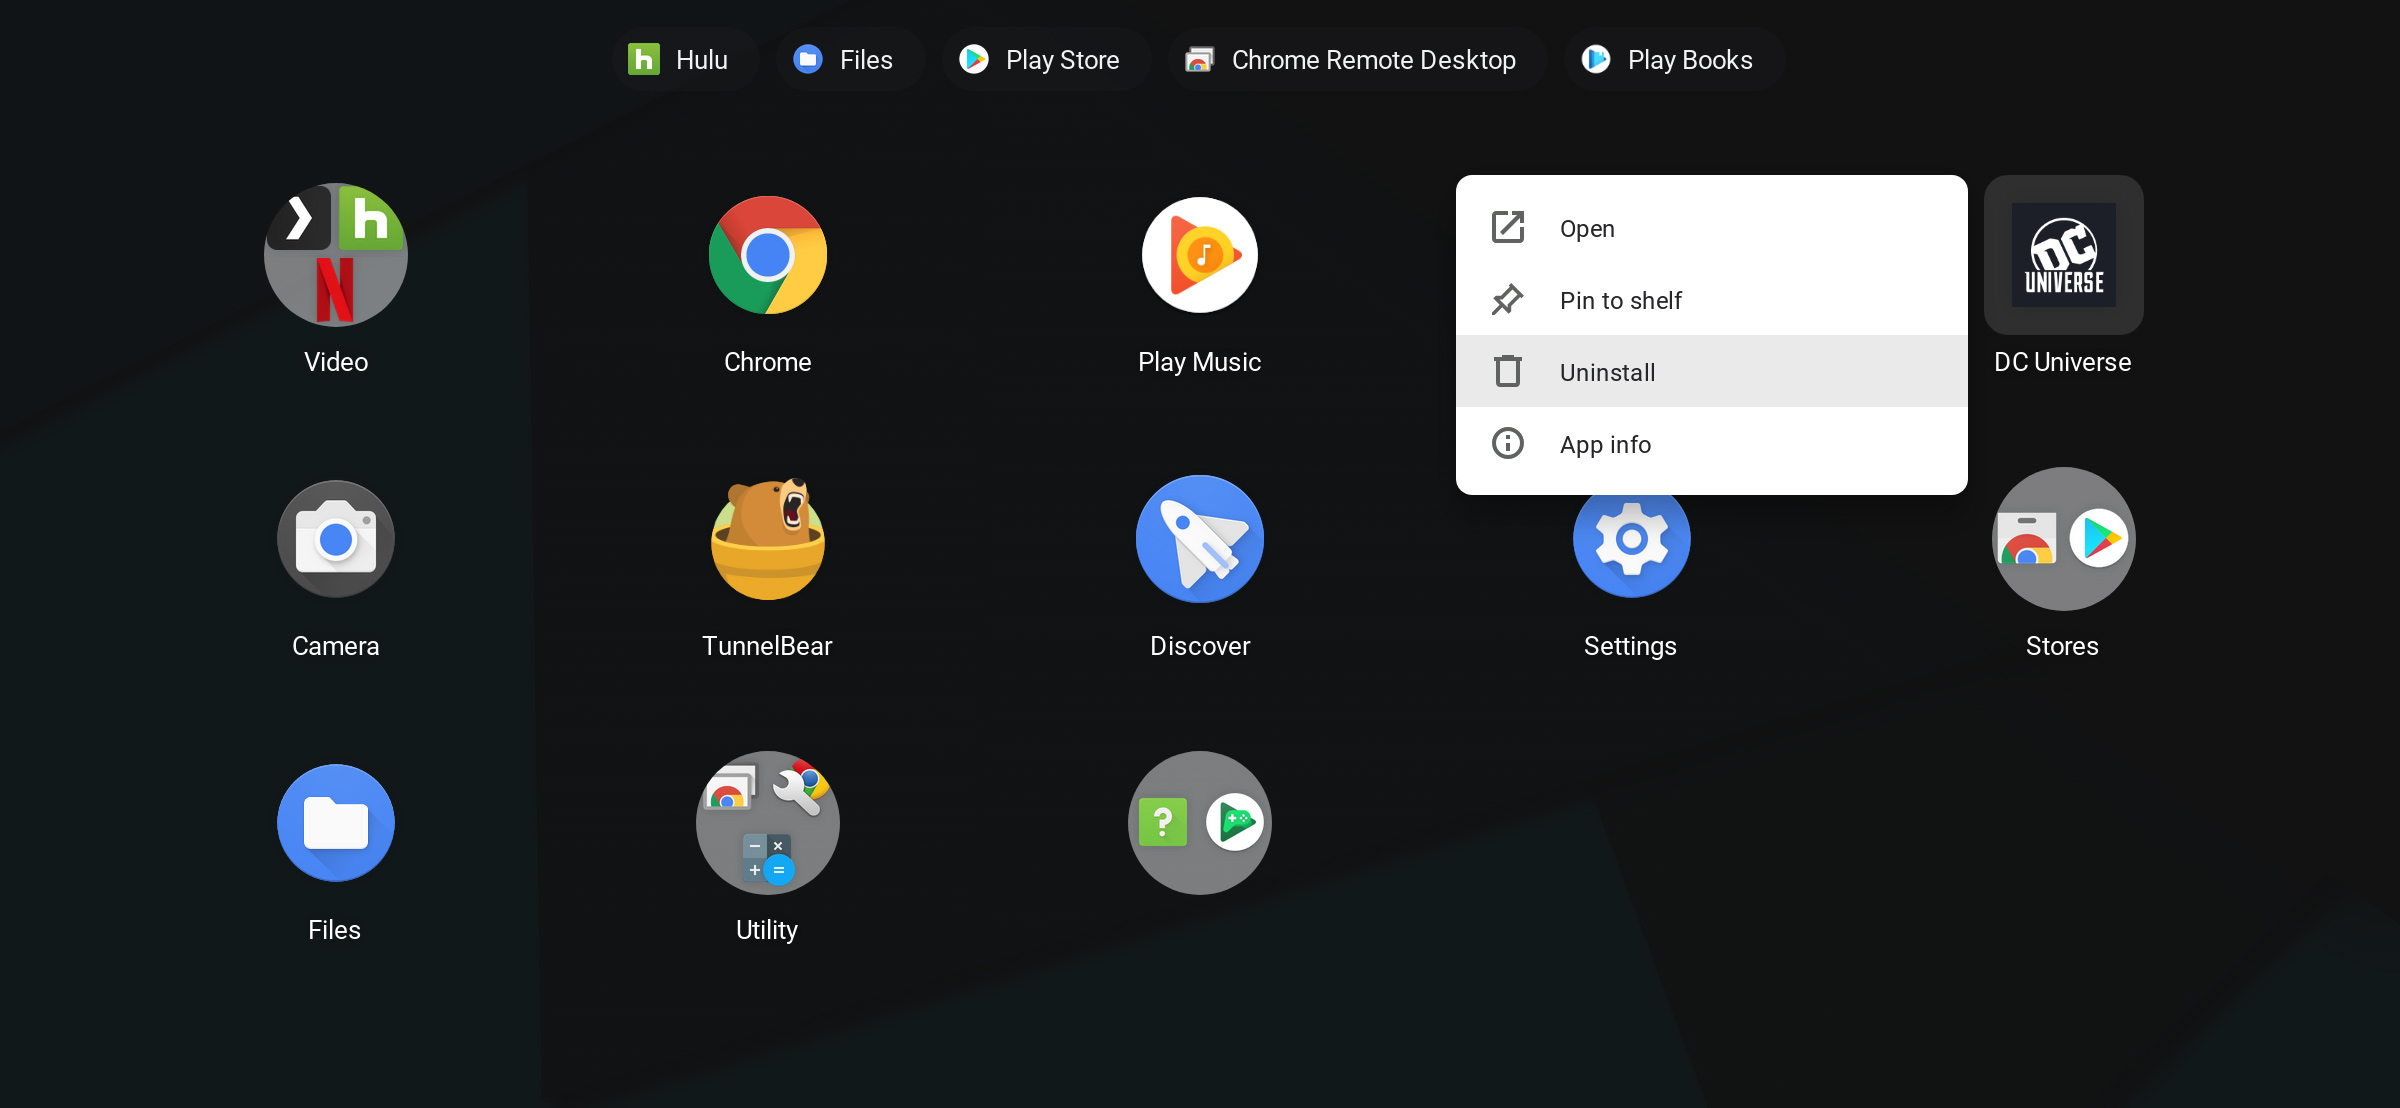 twitter download apps for chromebook